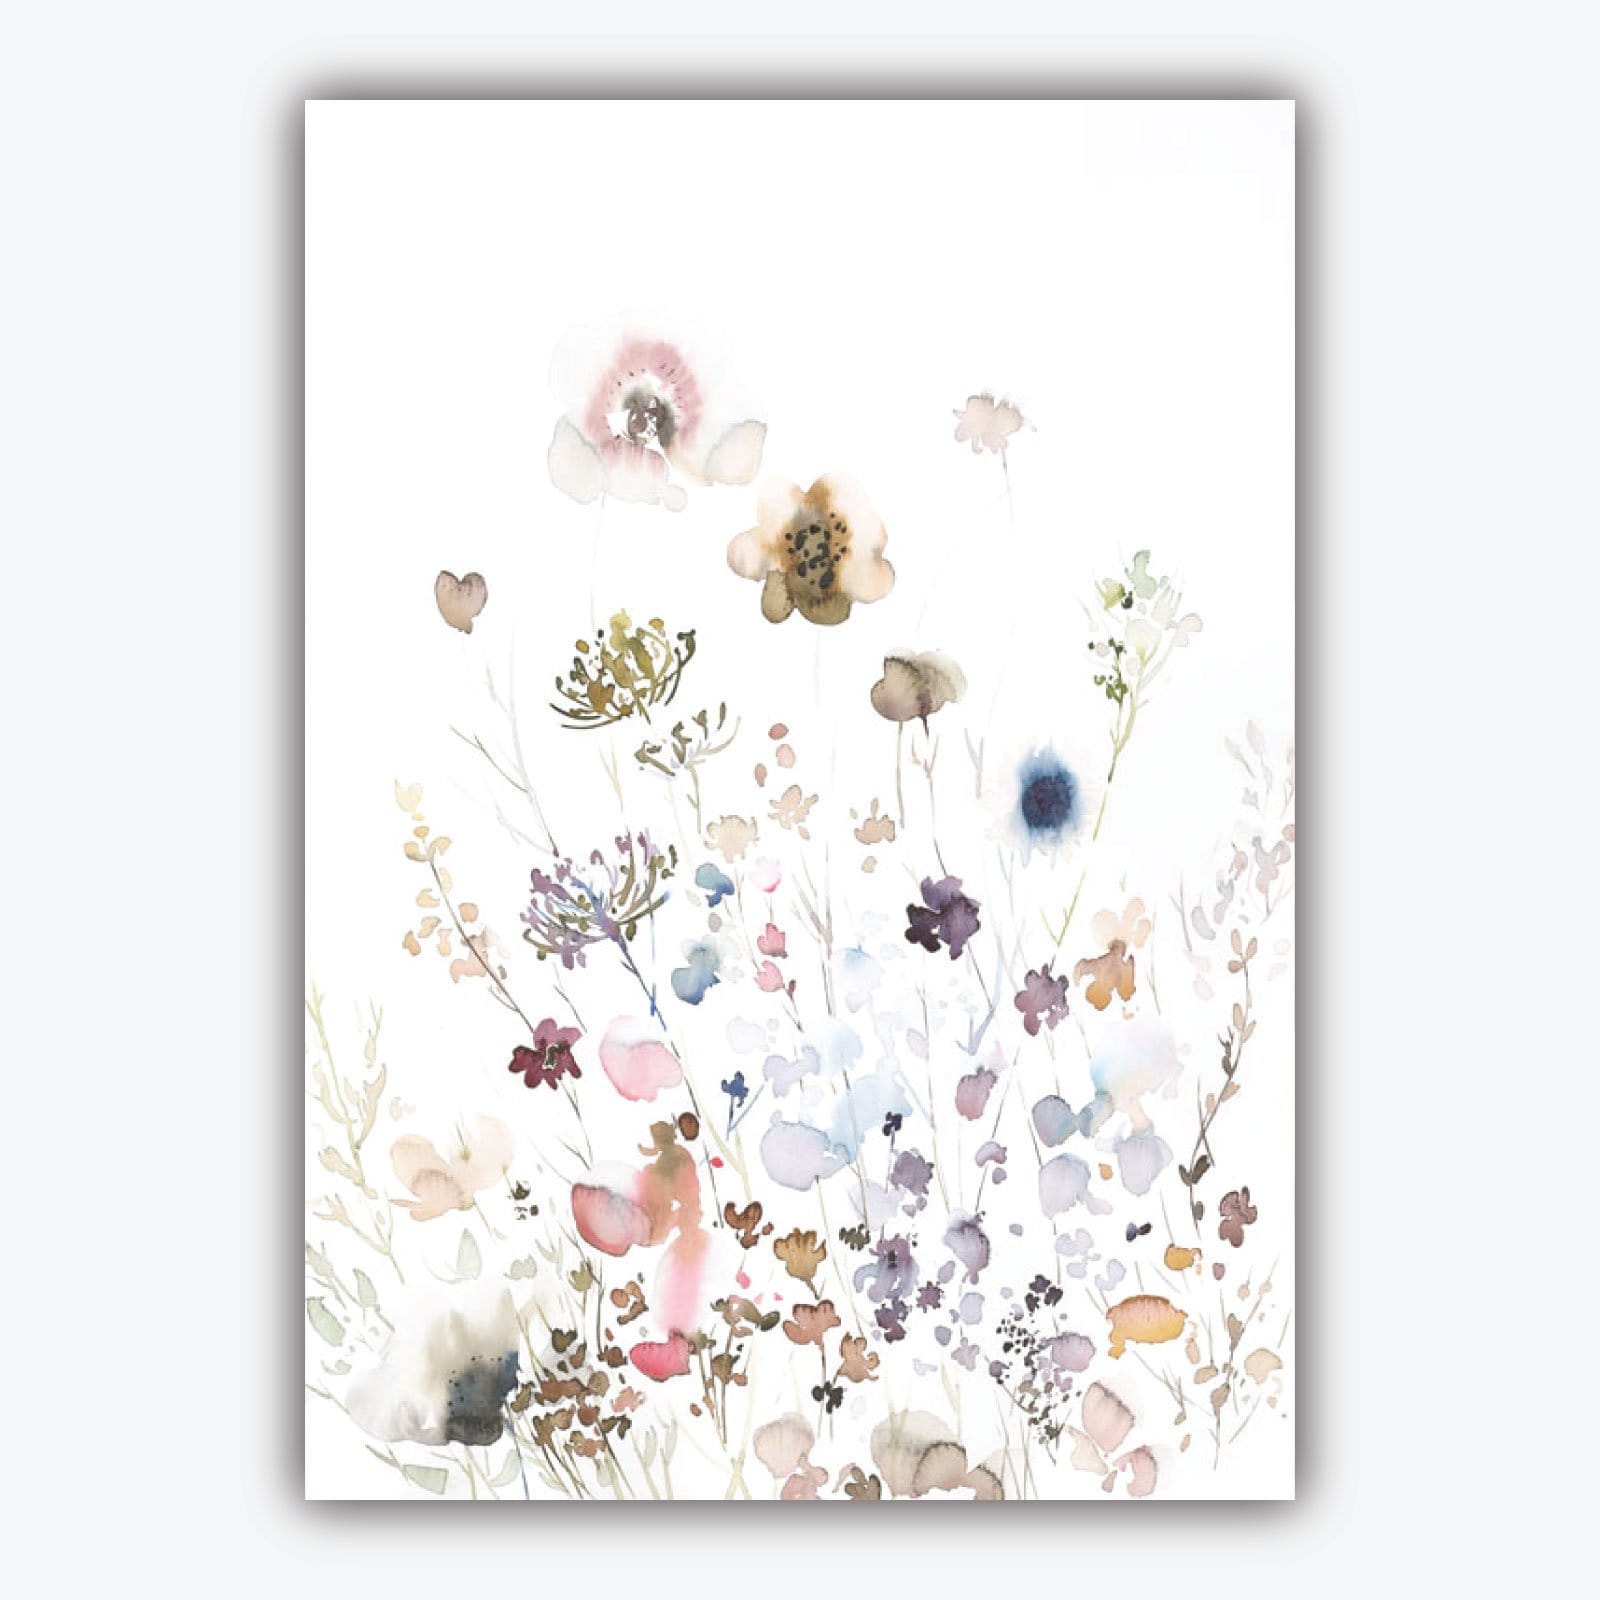 Set of 5 ORIGINAL Gallery Wall Mix of Watercolour Flowers Pink PEONIES Carnations watercolour meadow and Angel wings